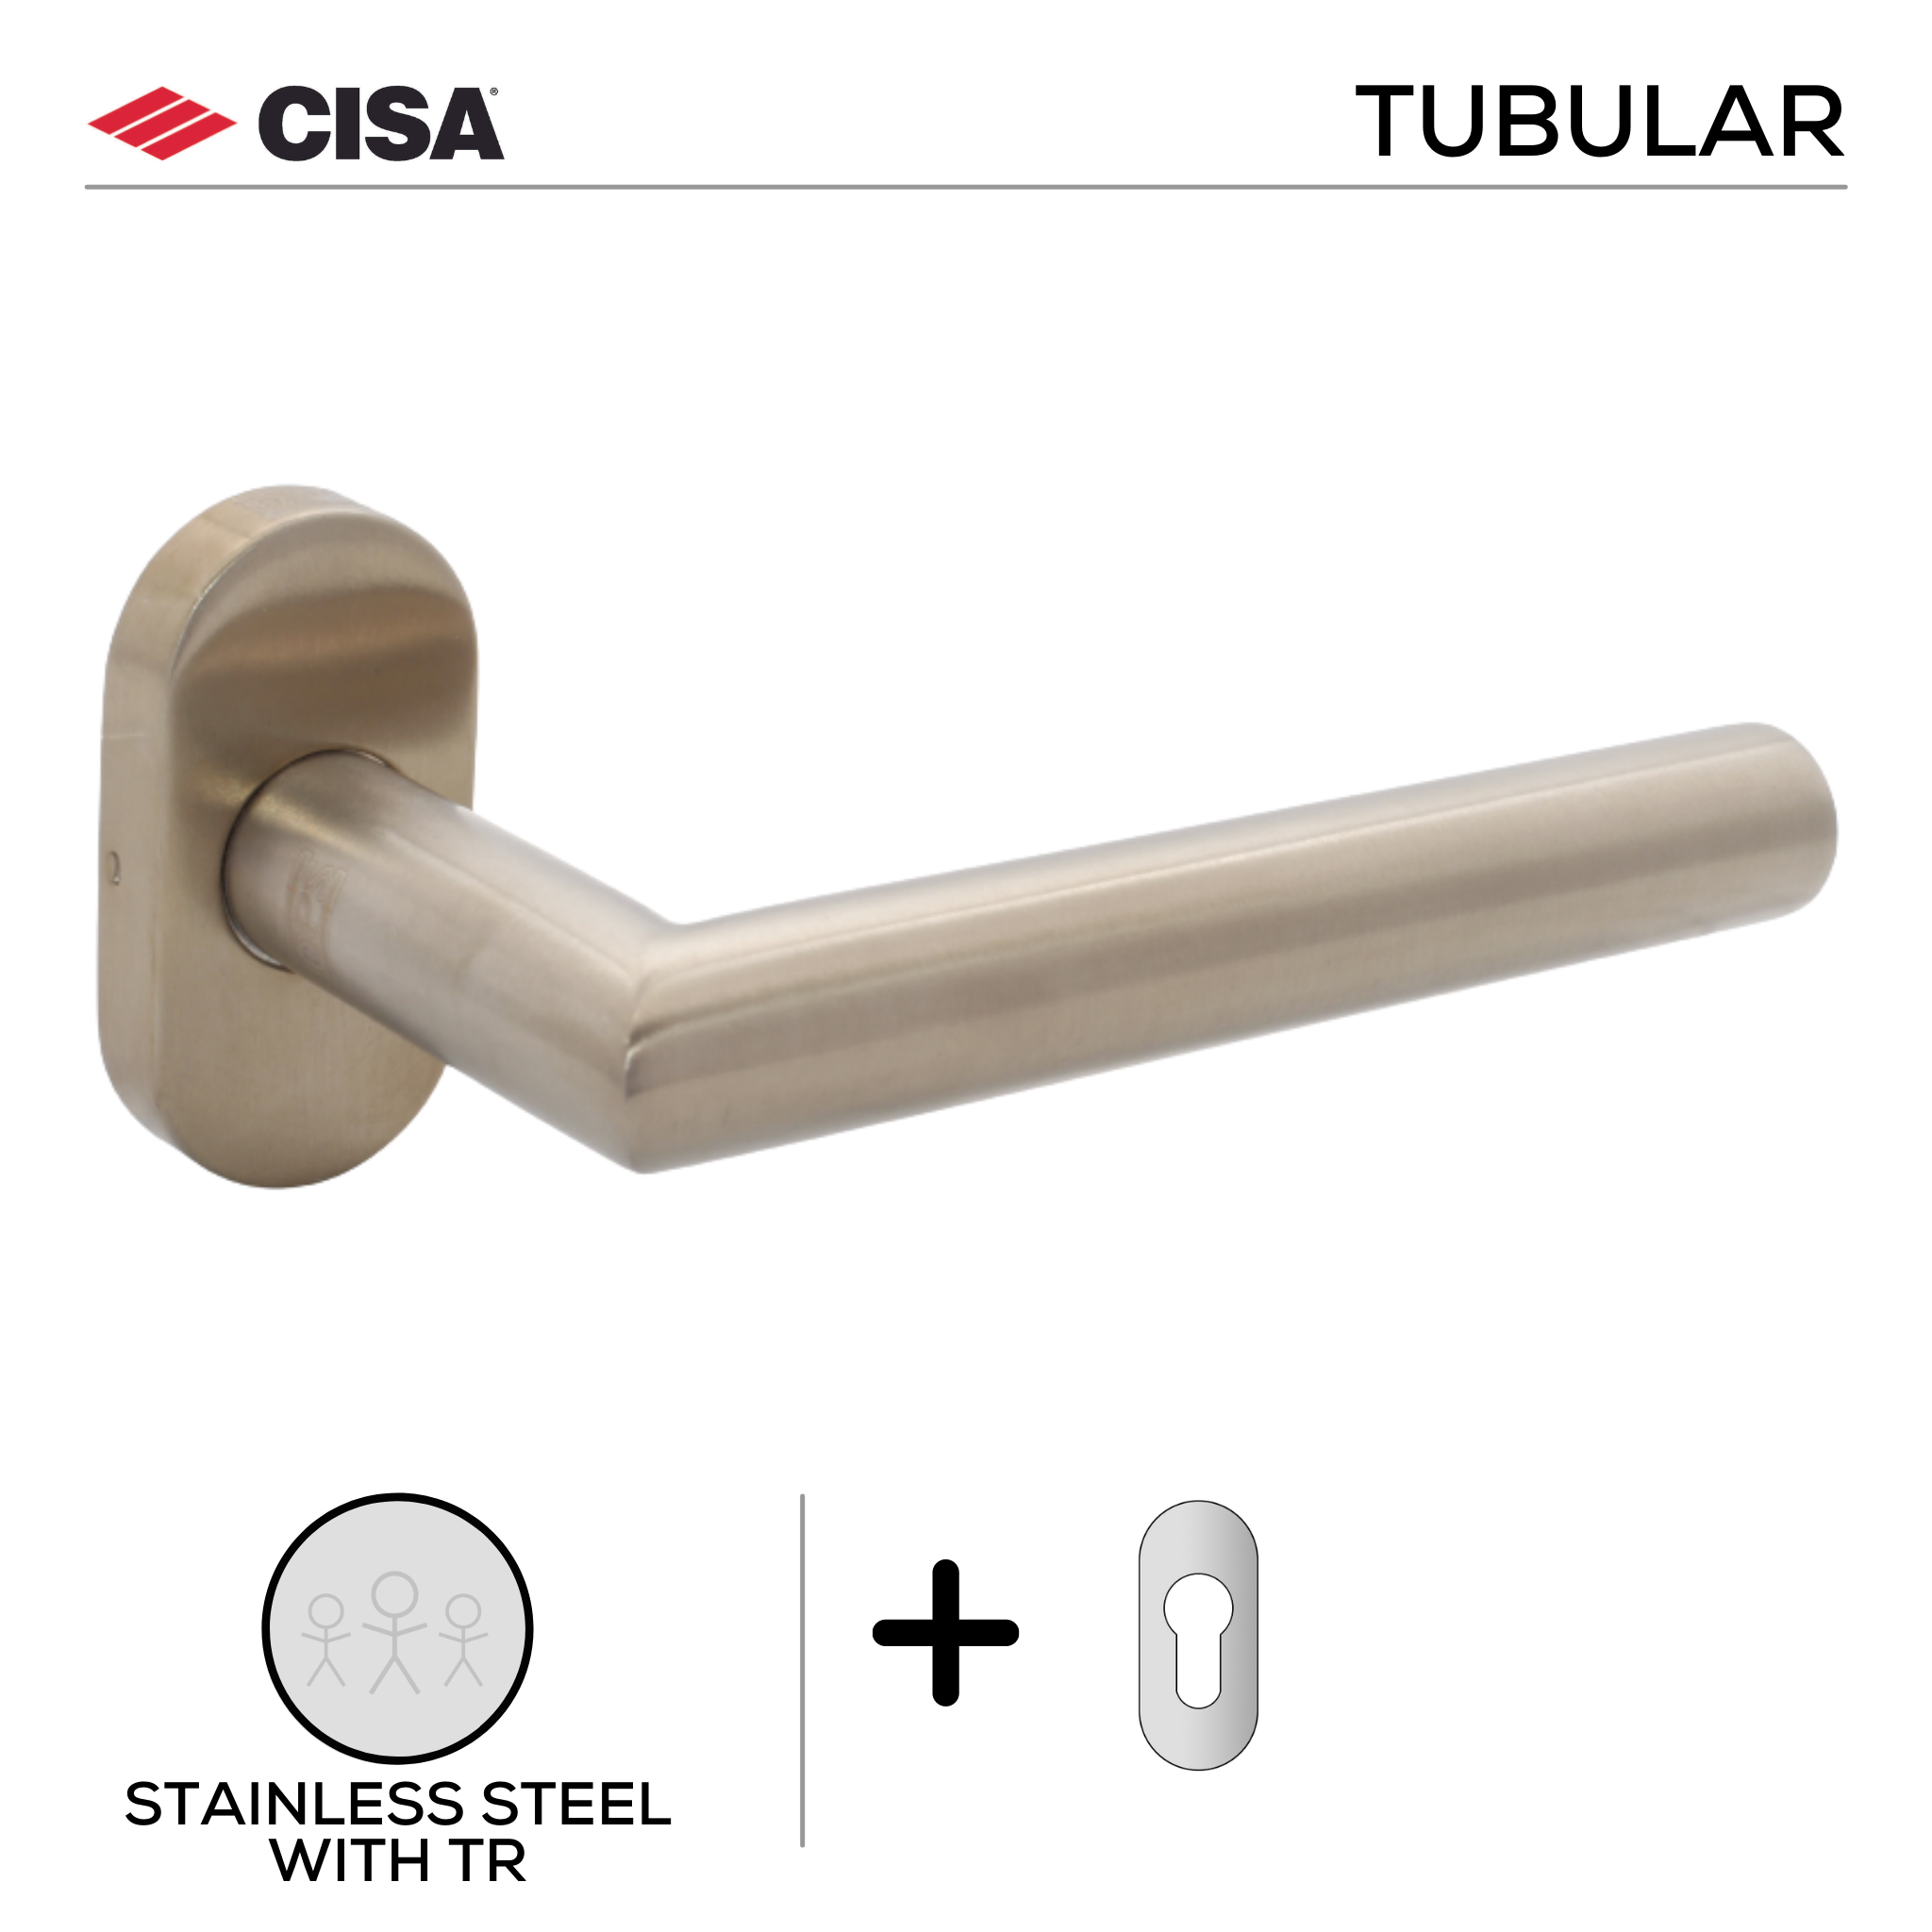 FT02.O.C.TR, Lever Handles, Tubular, On Oval Rose, With Cylinder Escutcheons, 134mm (l), Stainless Steel with Tarnish Resistant, CISA